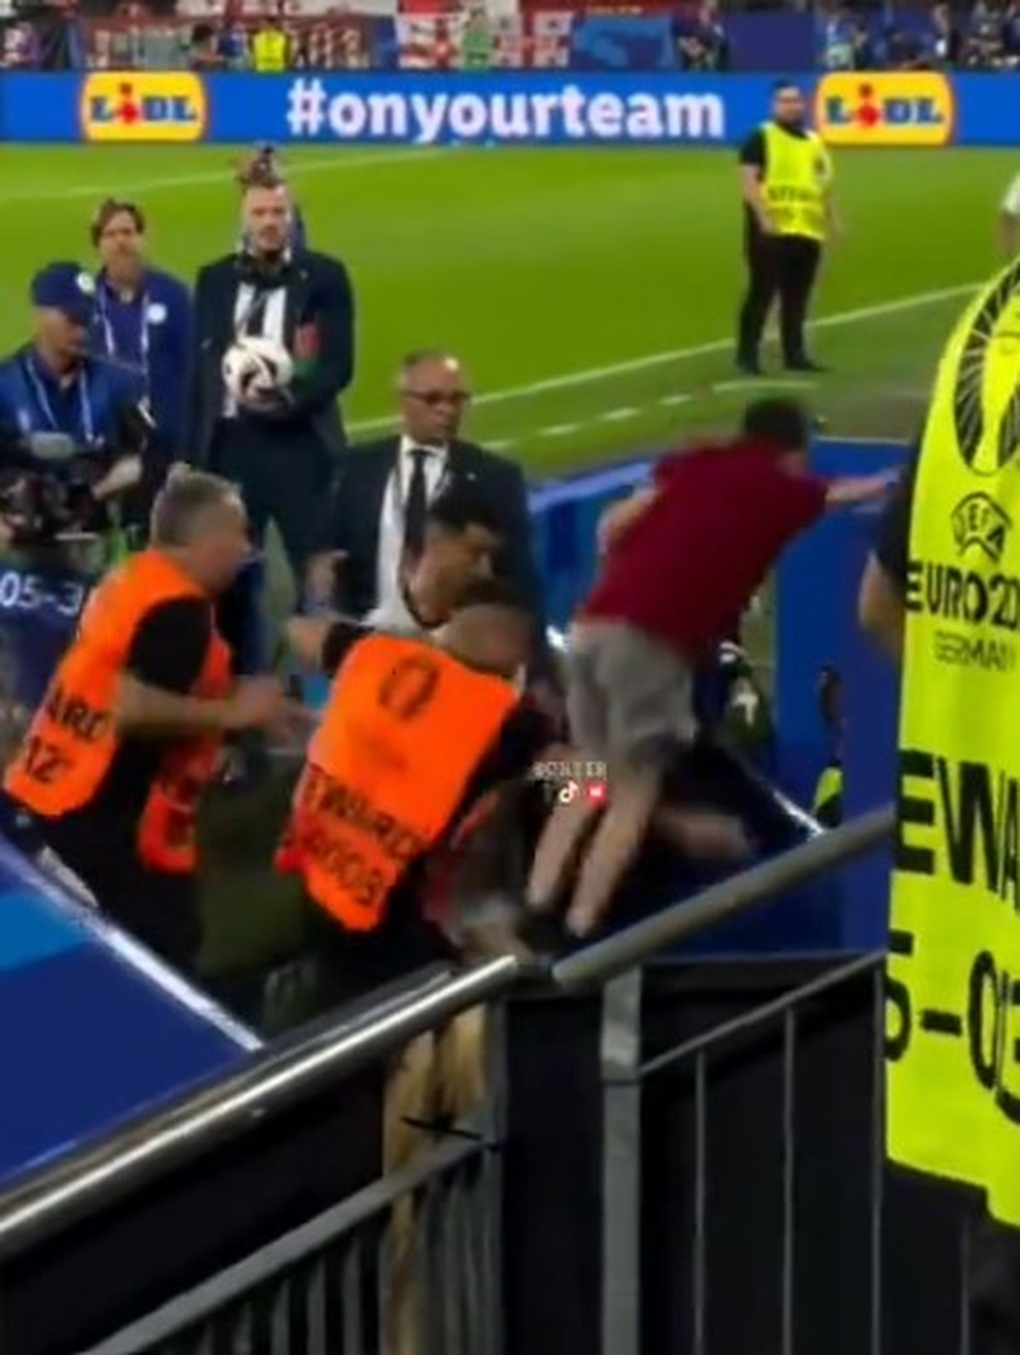 C.Ronaldo was almost kicked in the chest by an overexcited fan - 2